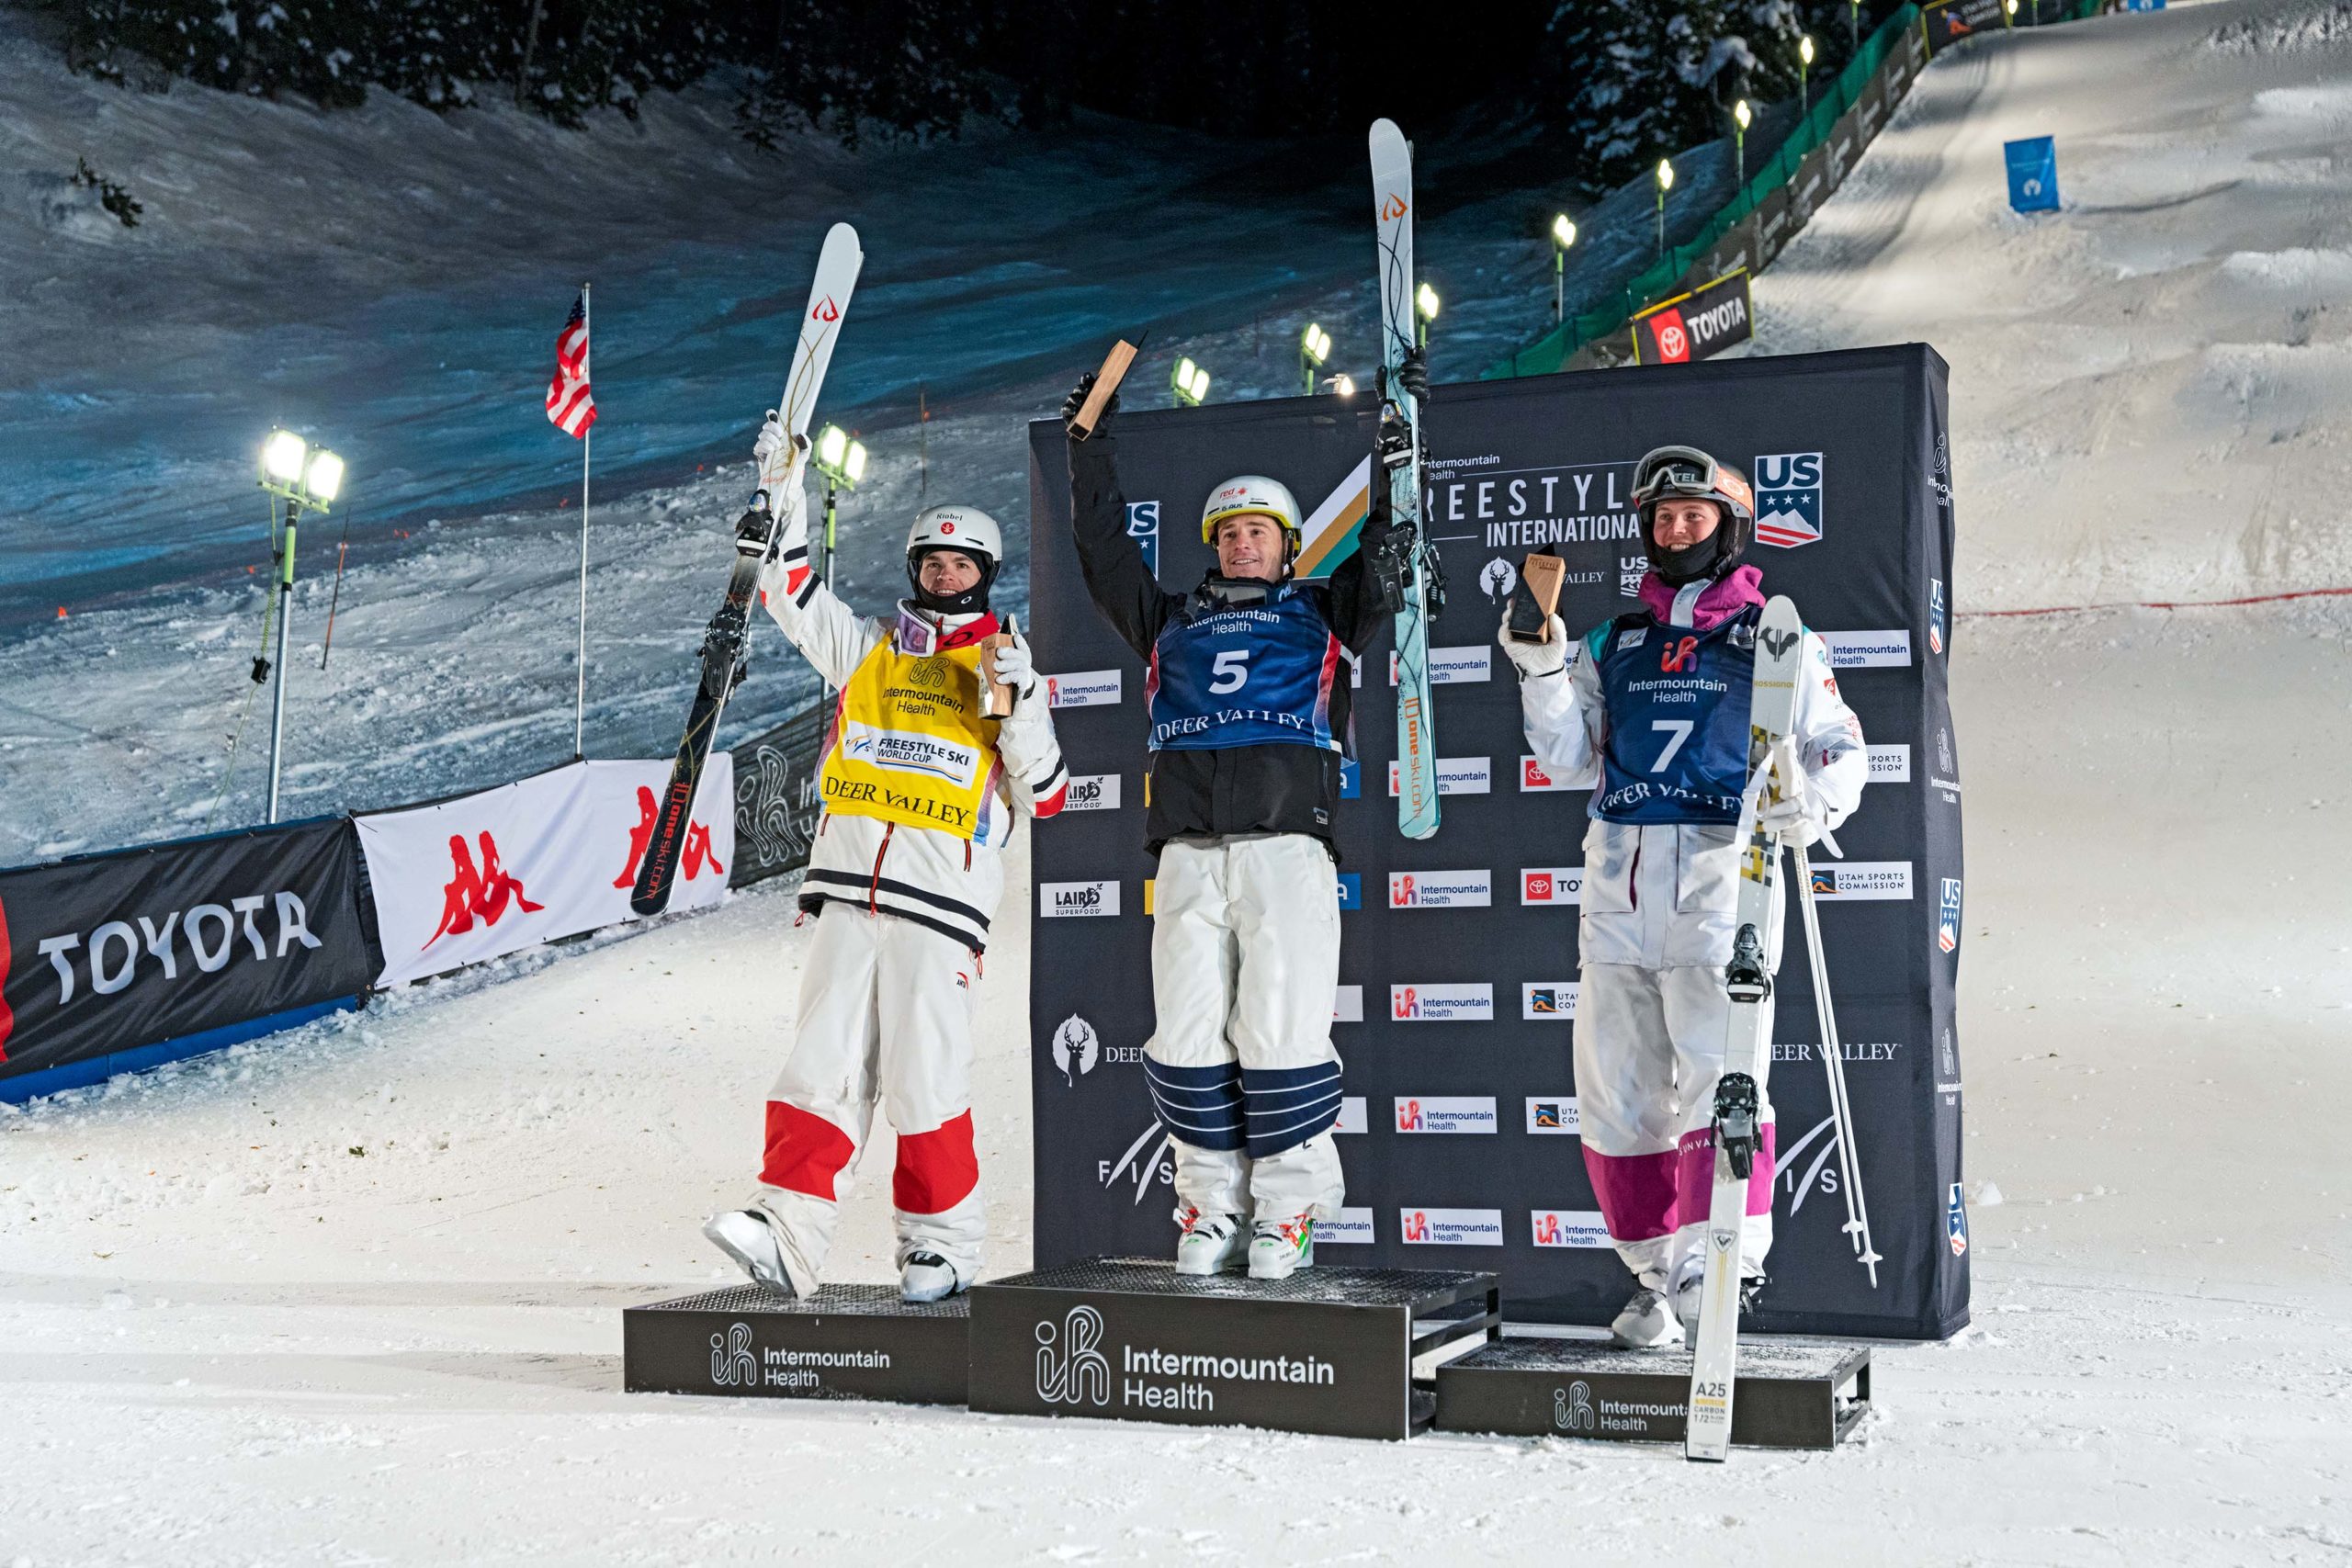 Men's Moguls podium showing the top three of the day. From Left to Right: Mikael Kingsbury 2nd, Matt Graham 1st and Benjamin Cavet 3rd.